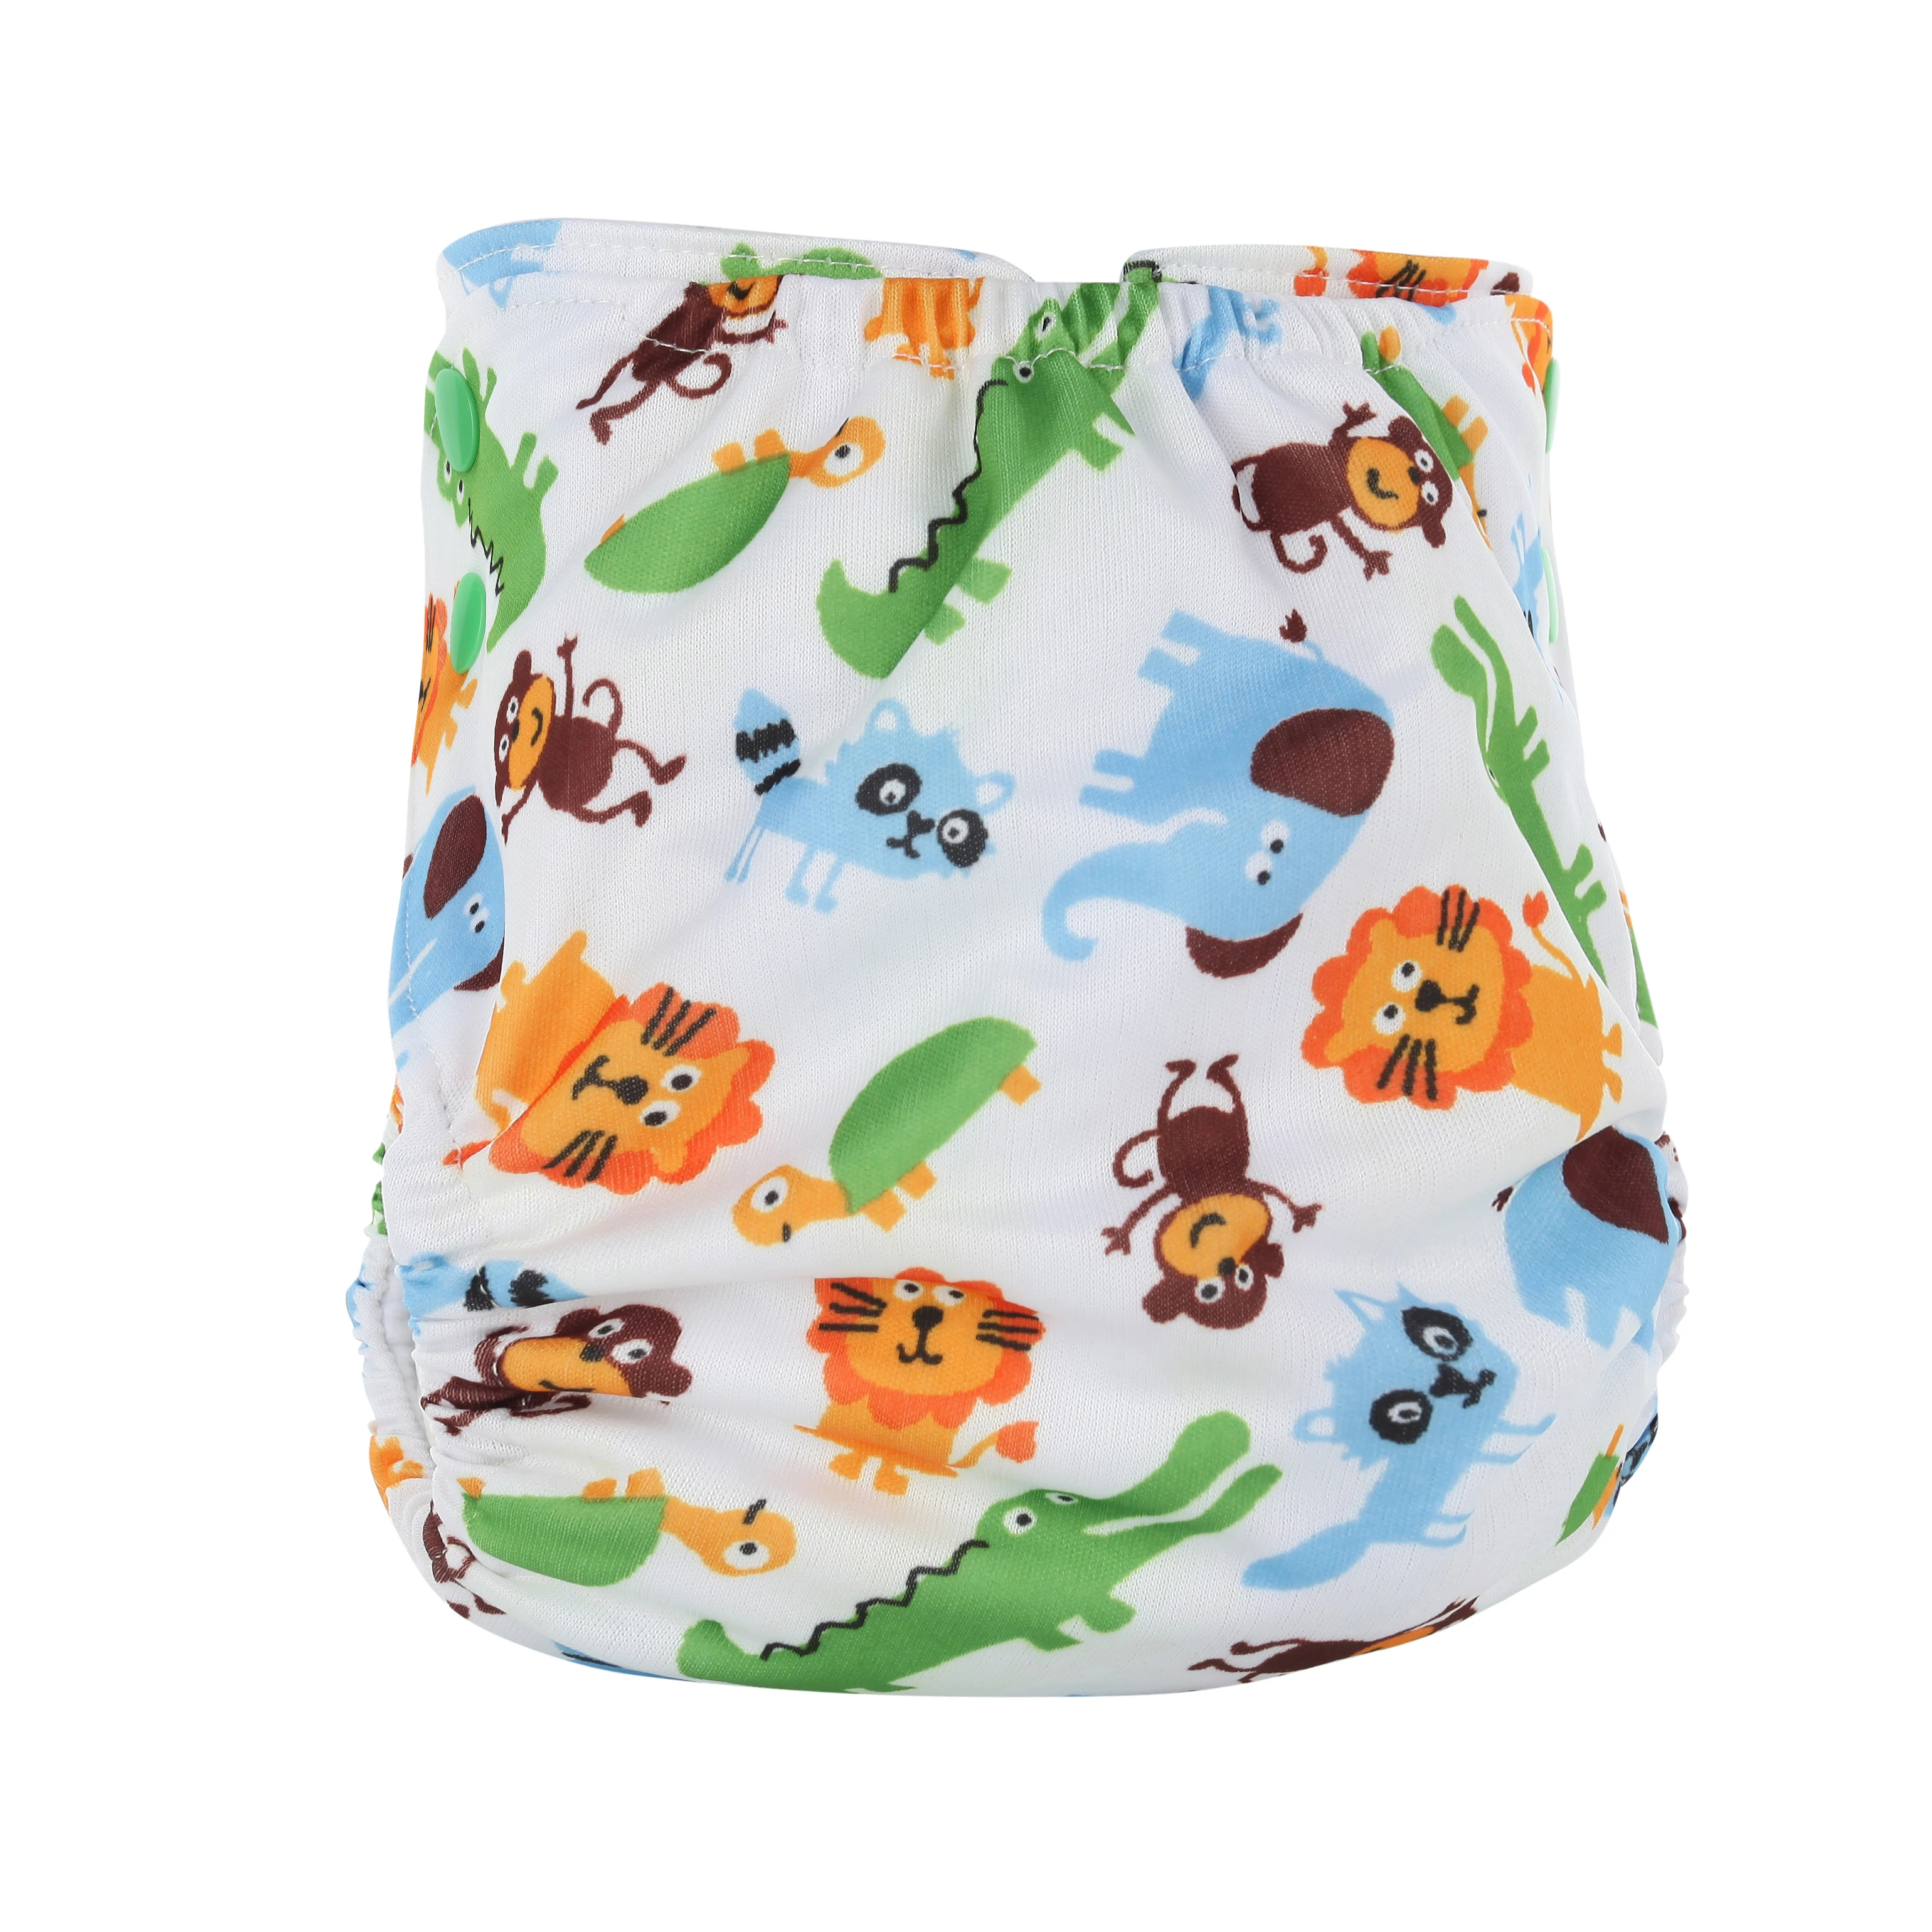 

Adjustable sizes diaper for baby waterproof ,pororo brand double row snap breathable baby cloth diaper Supplier in China, Print/solid